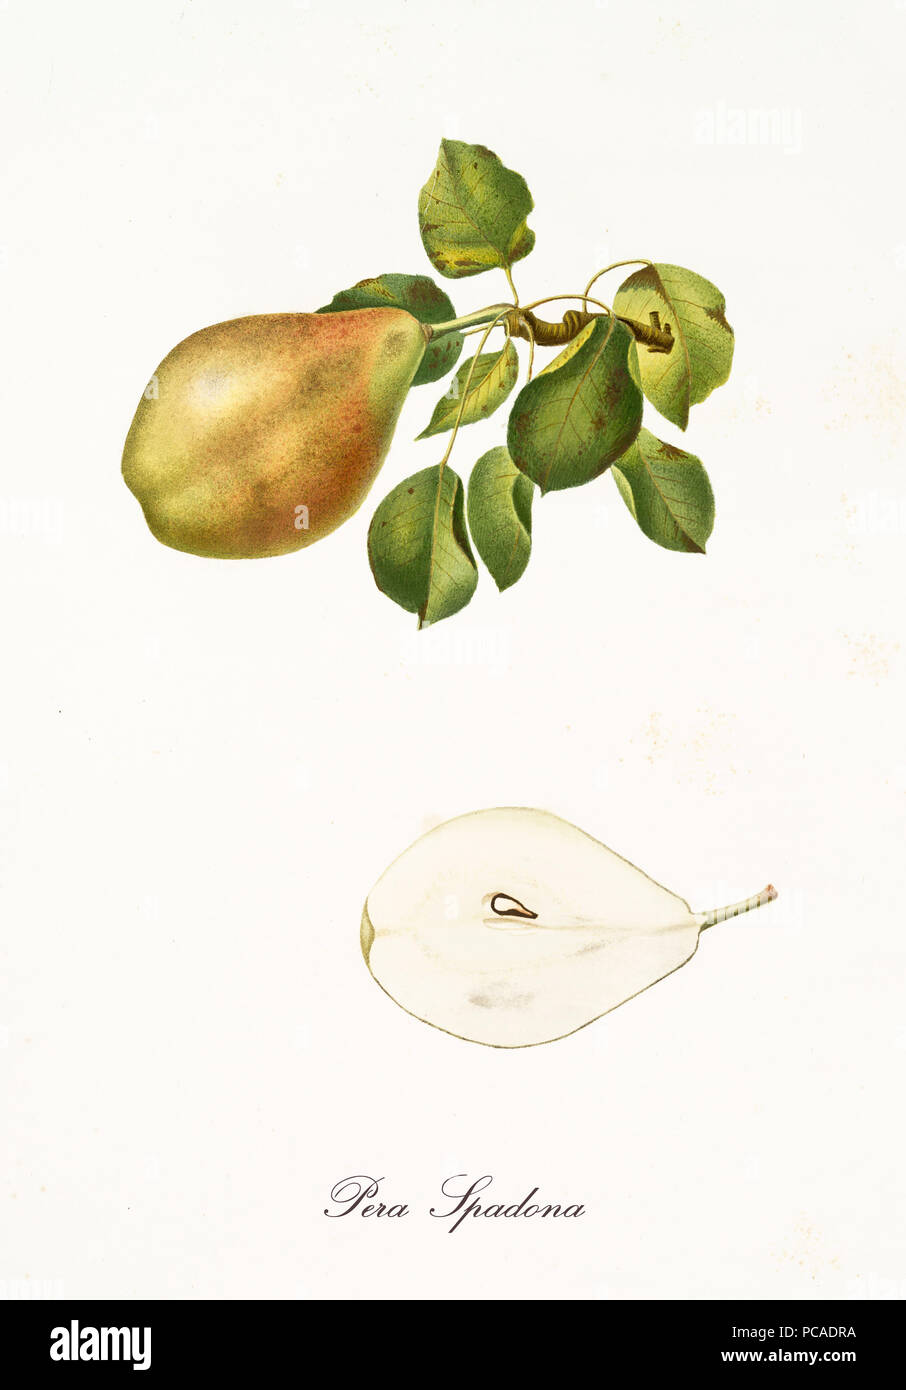 Pear, called Spadona pear, on single part of branch with leaves and isolated single fruit section on white background. Old botanical detailed illustration realized by Giorgio Gallesio on 1817, 1839 Stock Photo